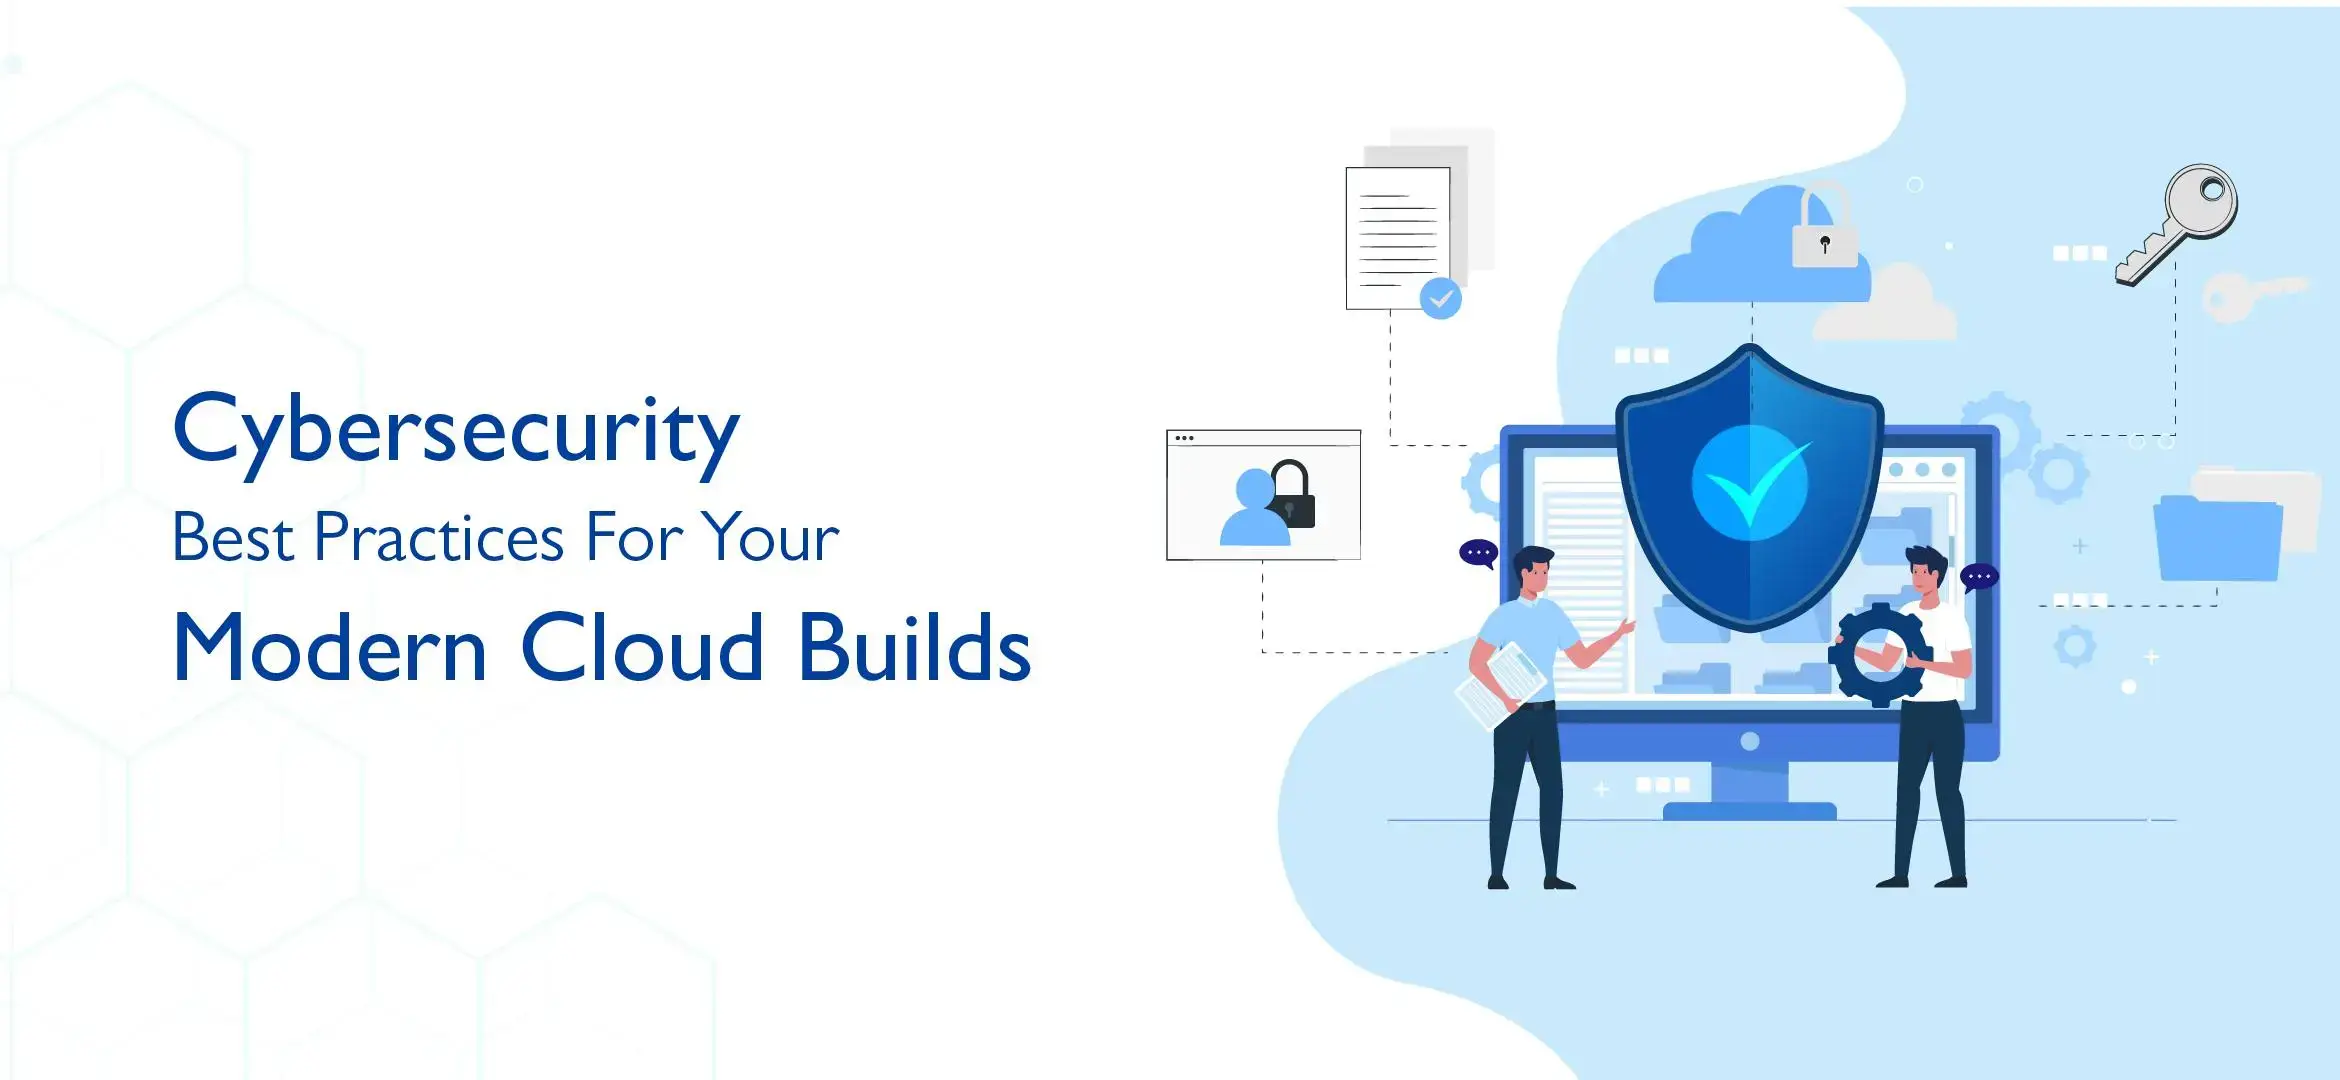 1712231520Cybersecurity Best Practices for Your Modern Cloud Builds.webp